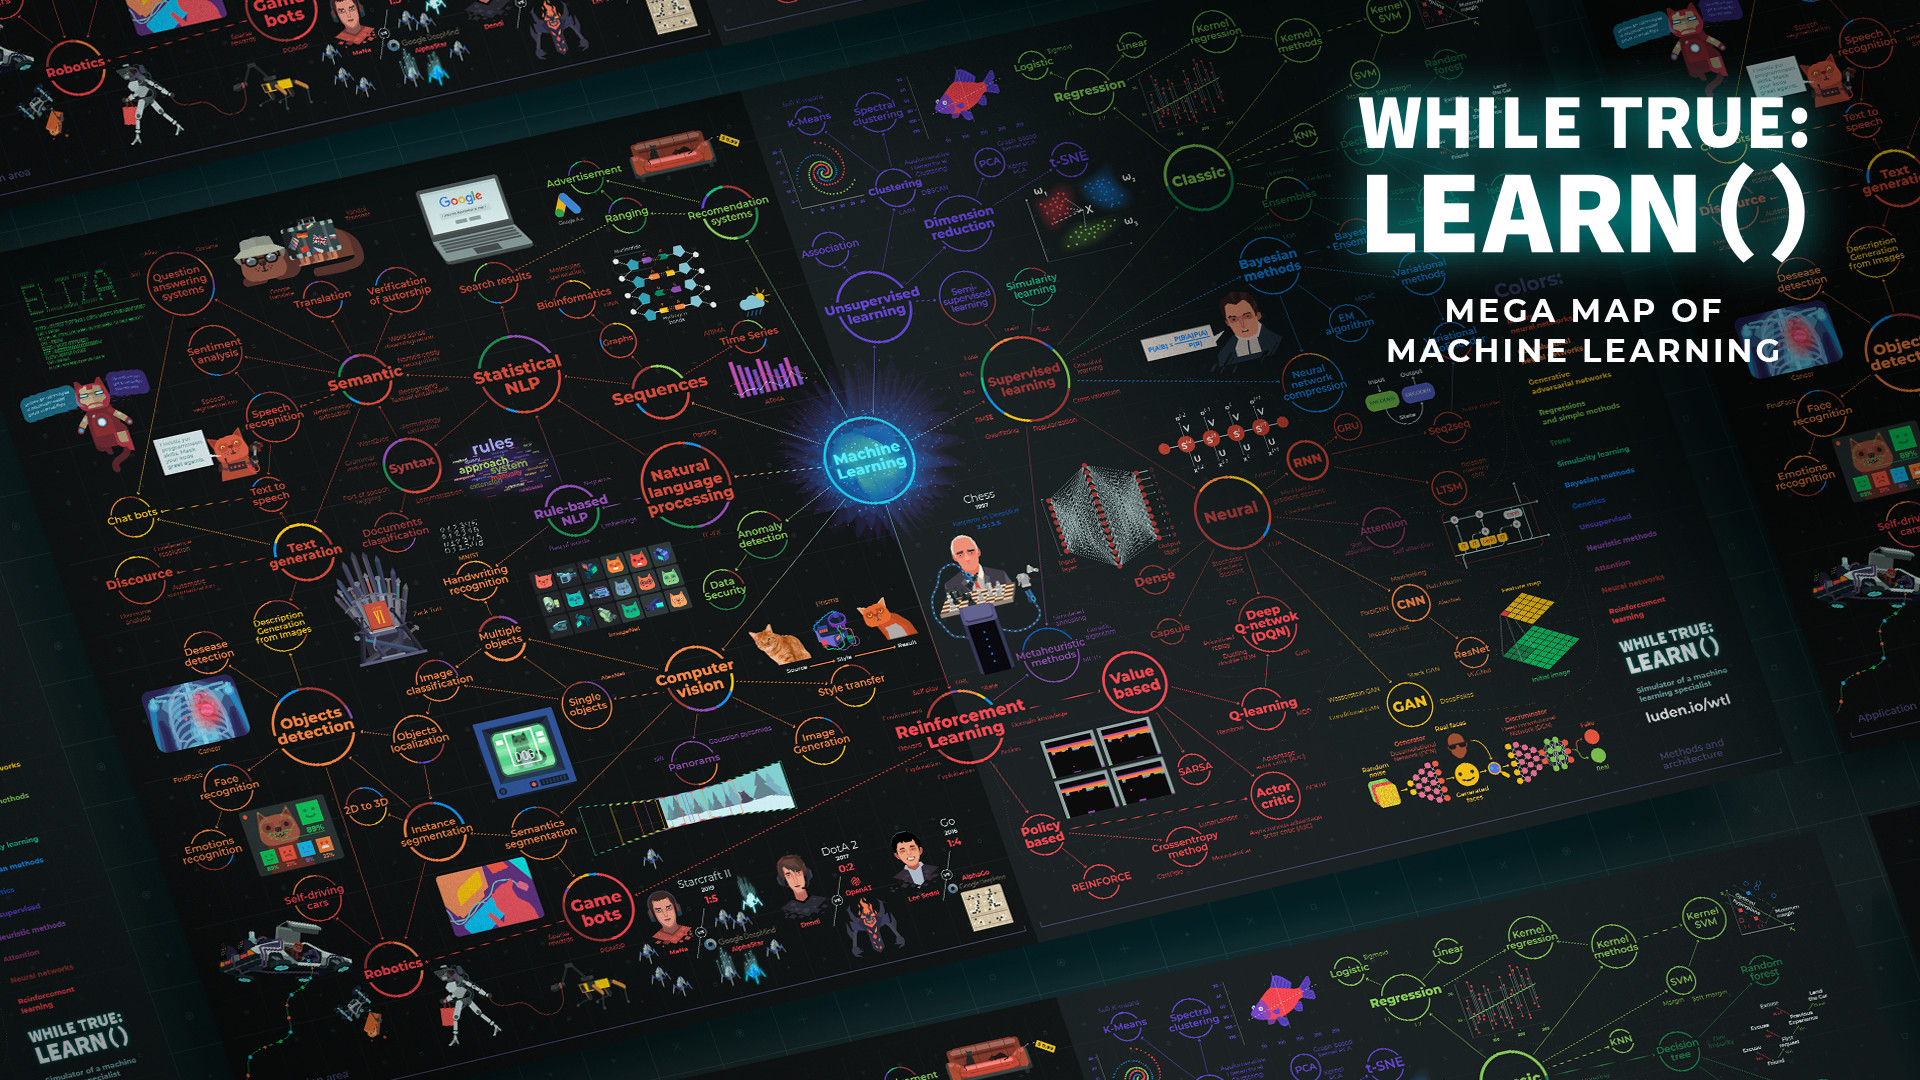 [$ 2.15] while True: learn() - Mega Map of Machine Learning DLC Steam CD key